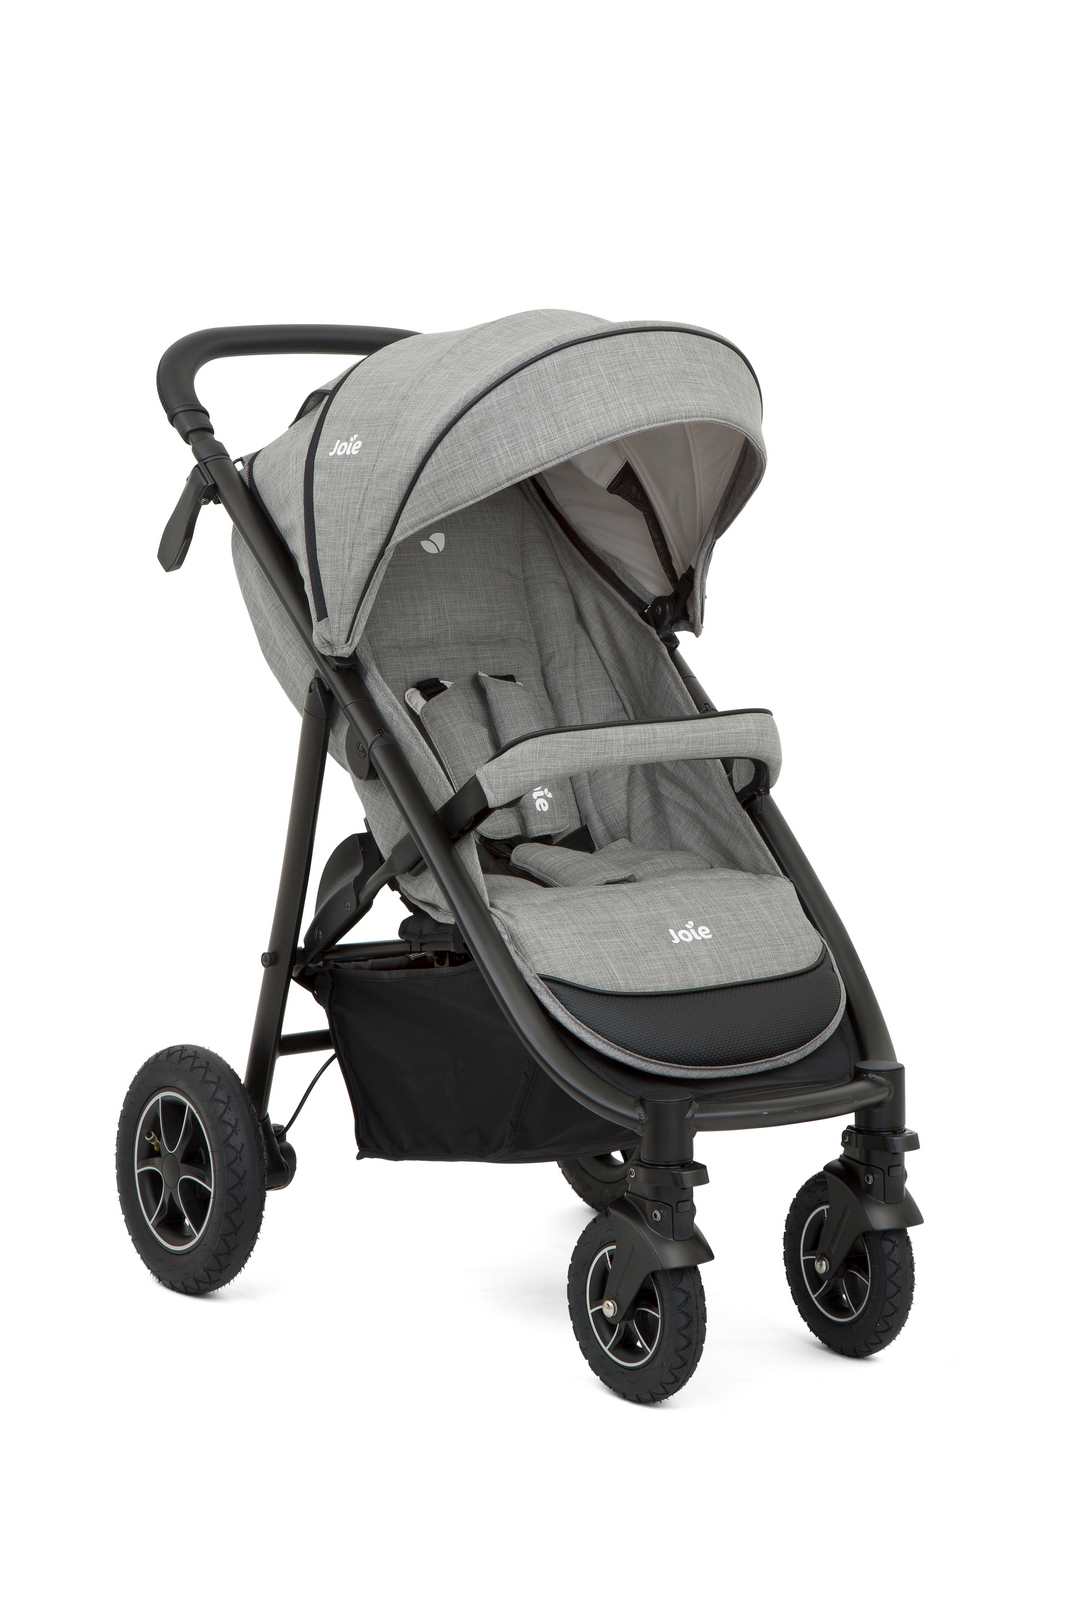 joie foggy travel system